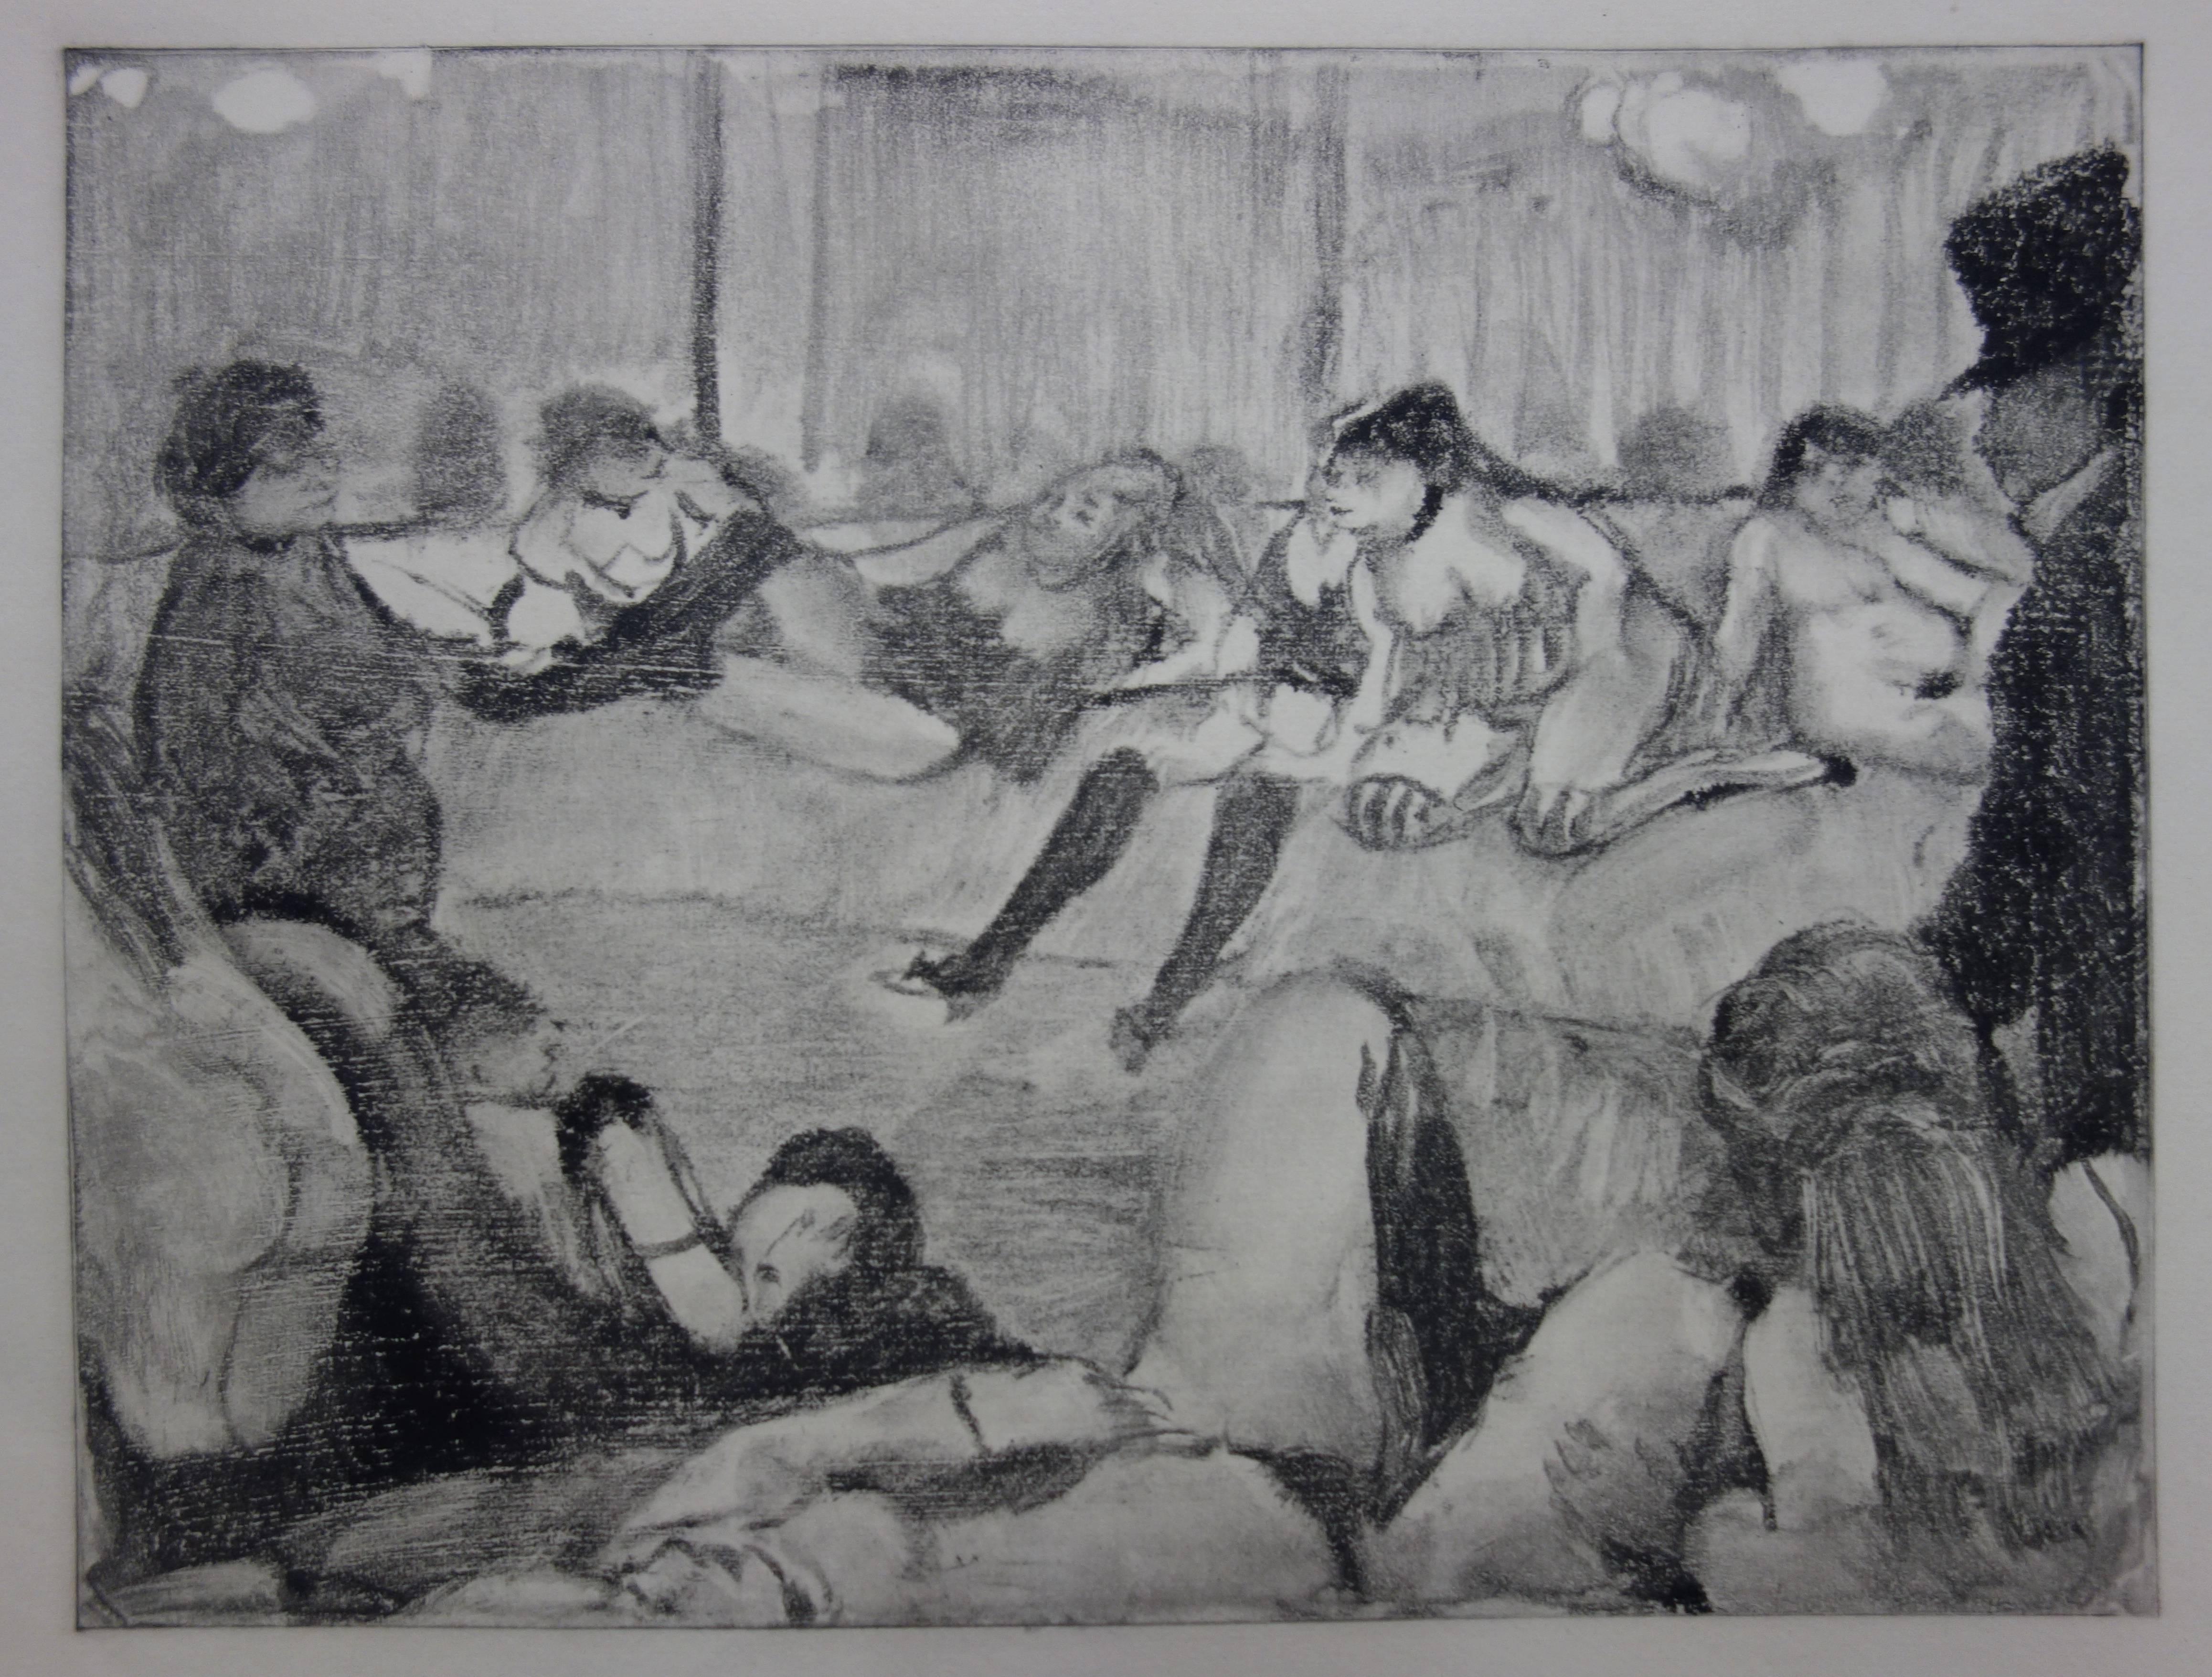 Client Arriving in a Whorehouse - Original etching